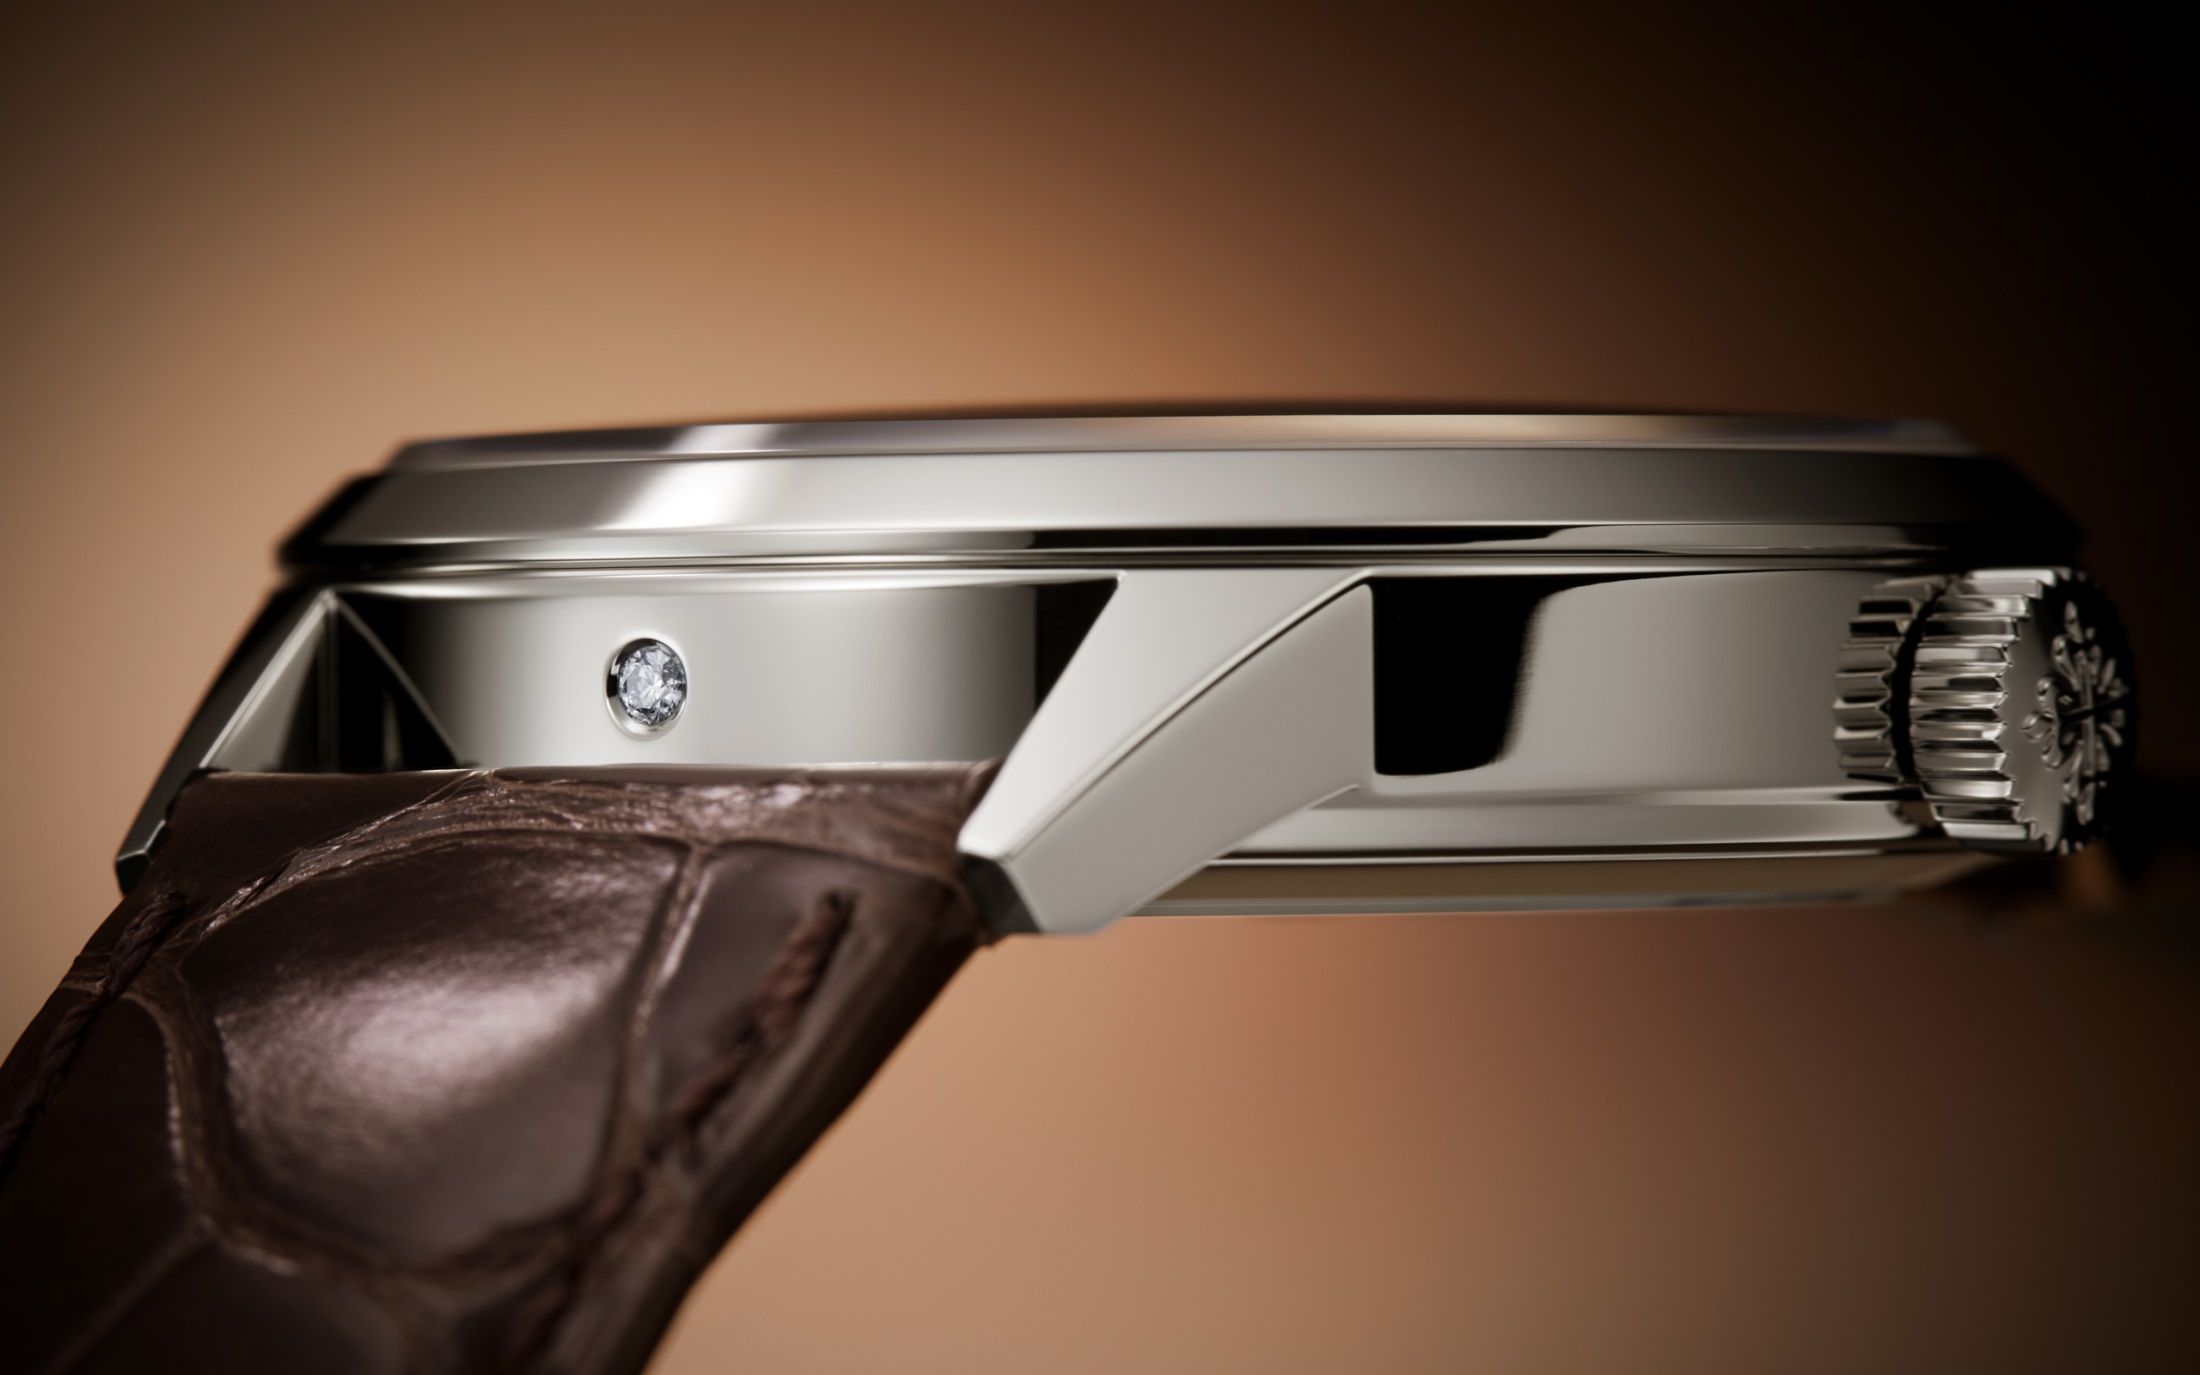 The 950 Platinum case has a diameter of 41.3mm and a height of 11.07mm